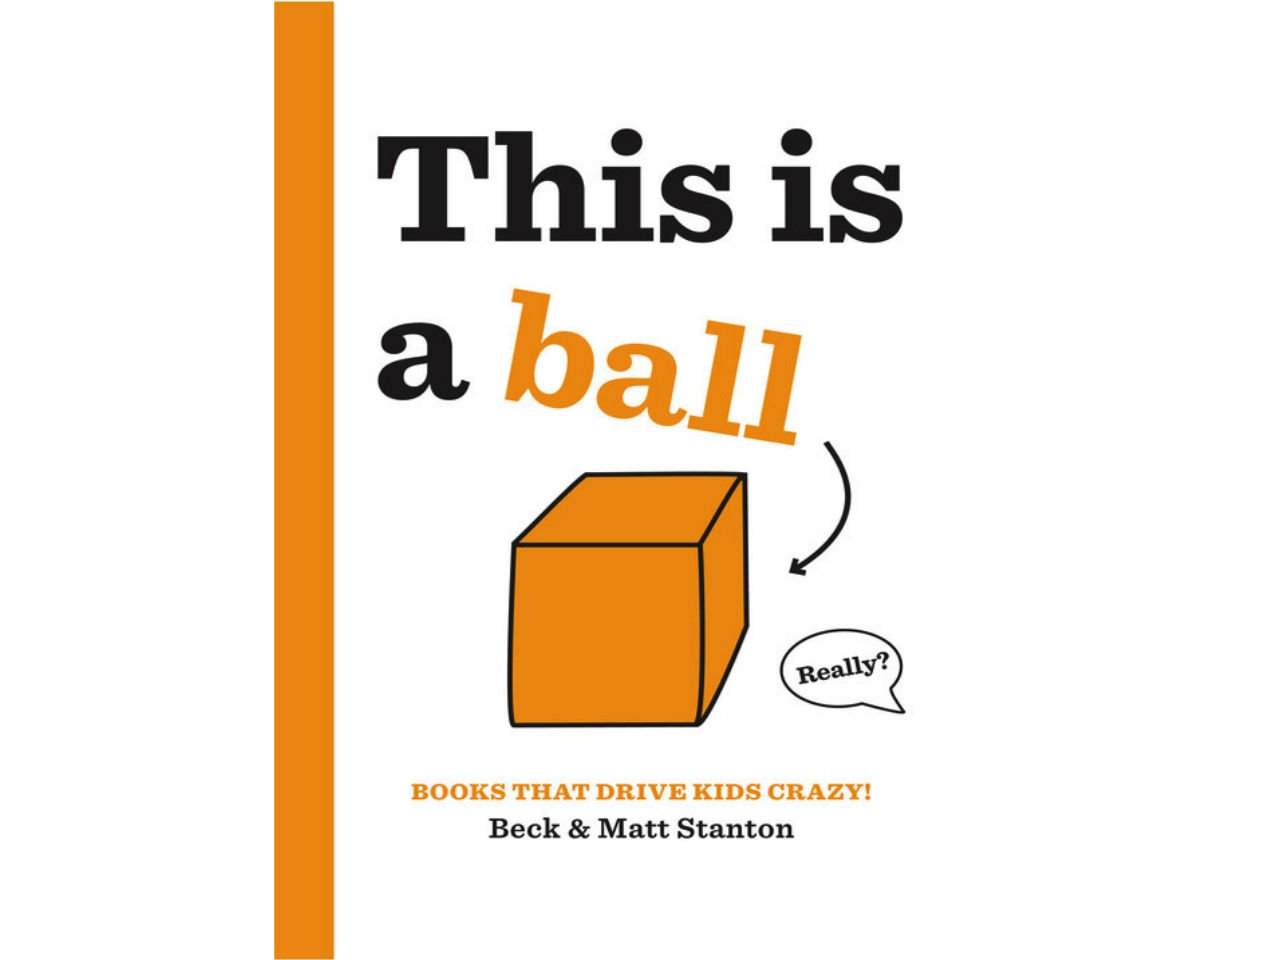 Book cover of This is a Ball depicting an arrow pointing to an orange box